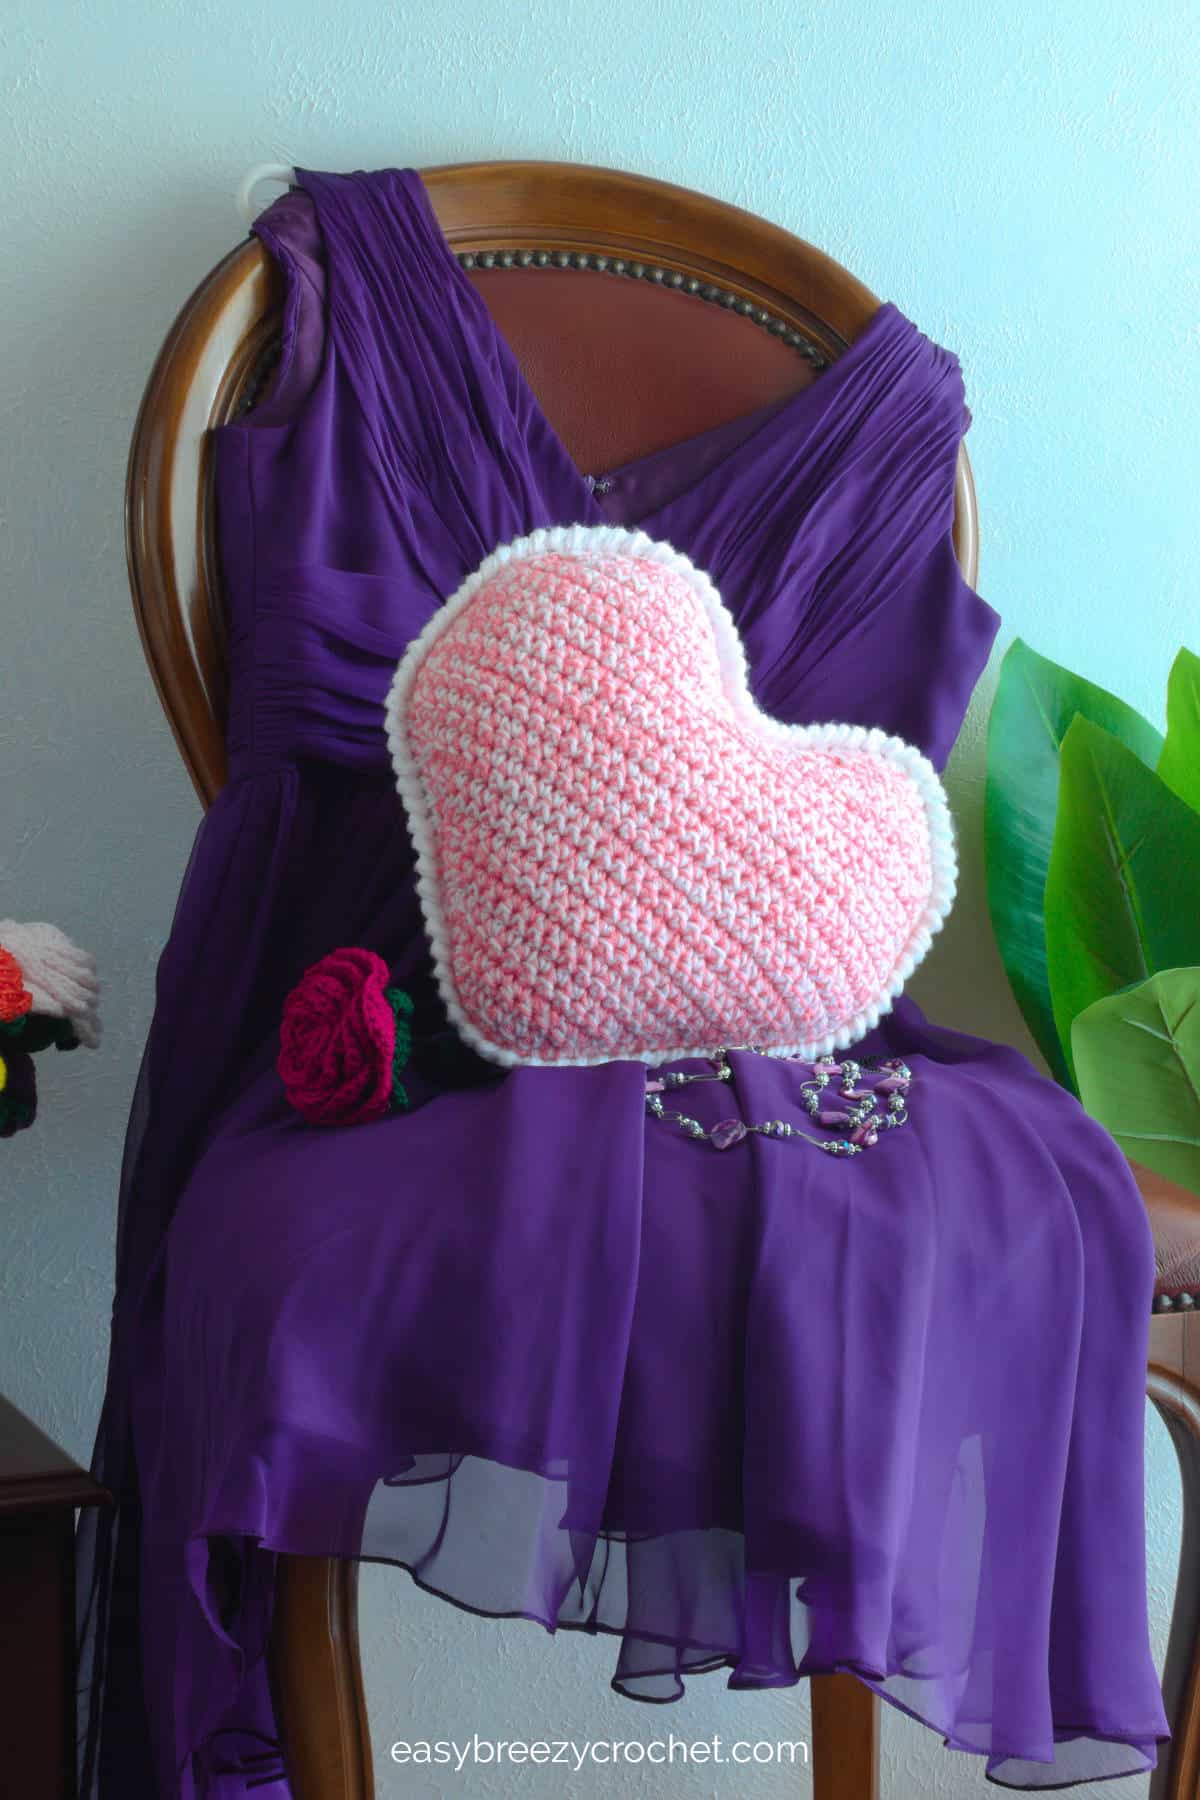 A pink and white crochet heart pillow on a purple dress on a chair.